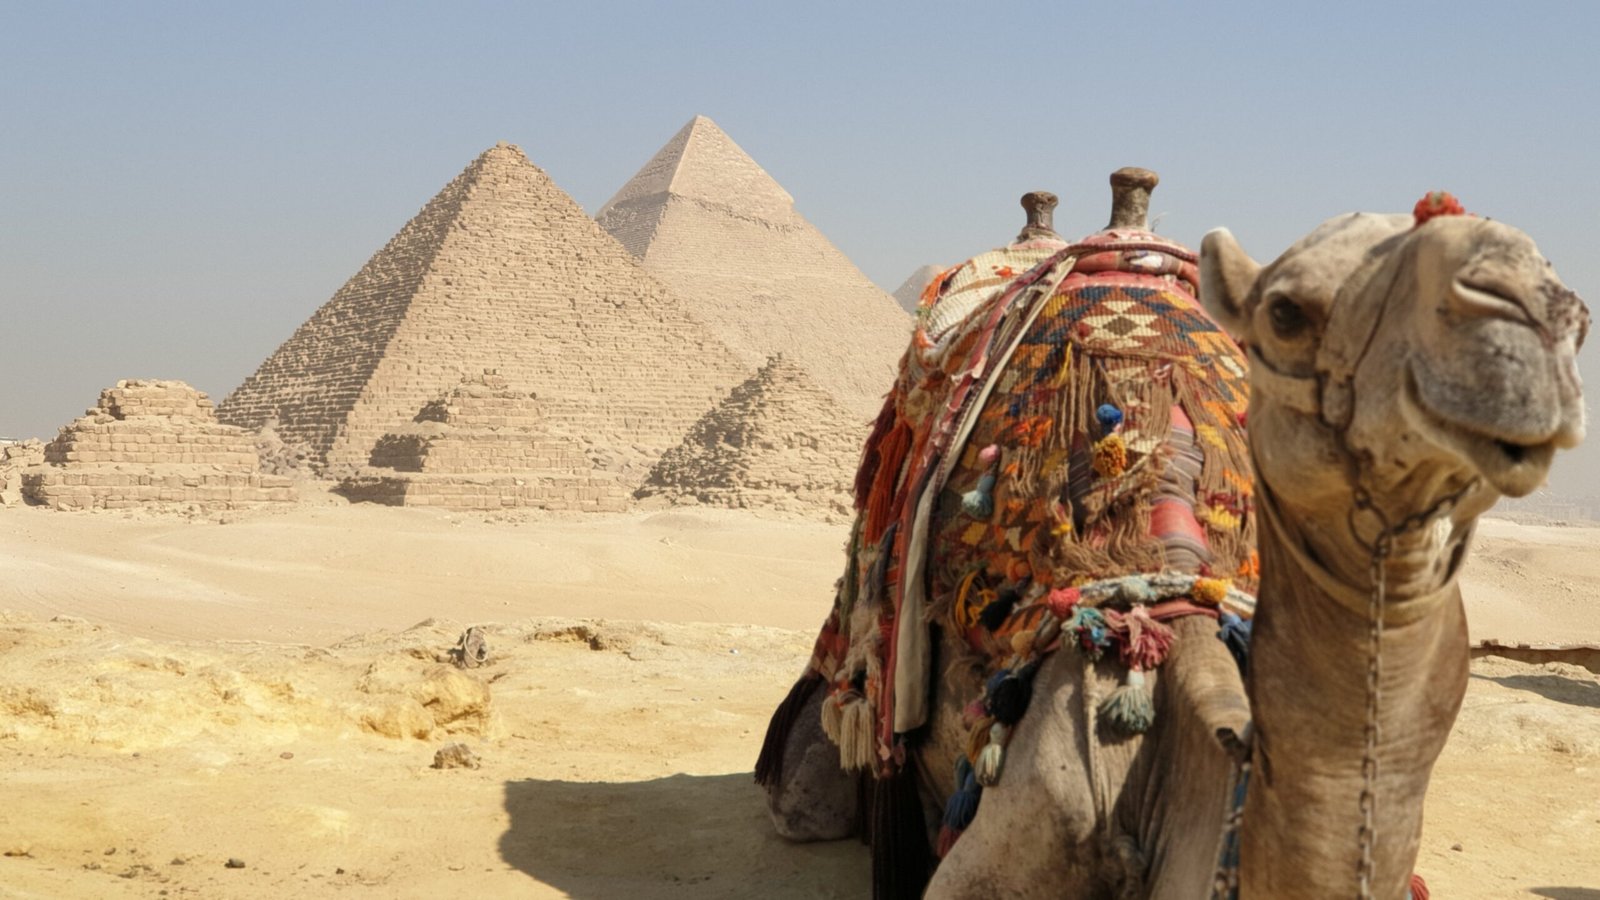 Giza Pyramids and Sphinx Full Day Tour